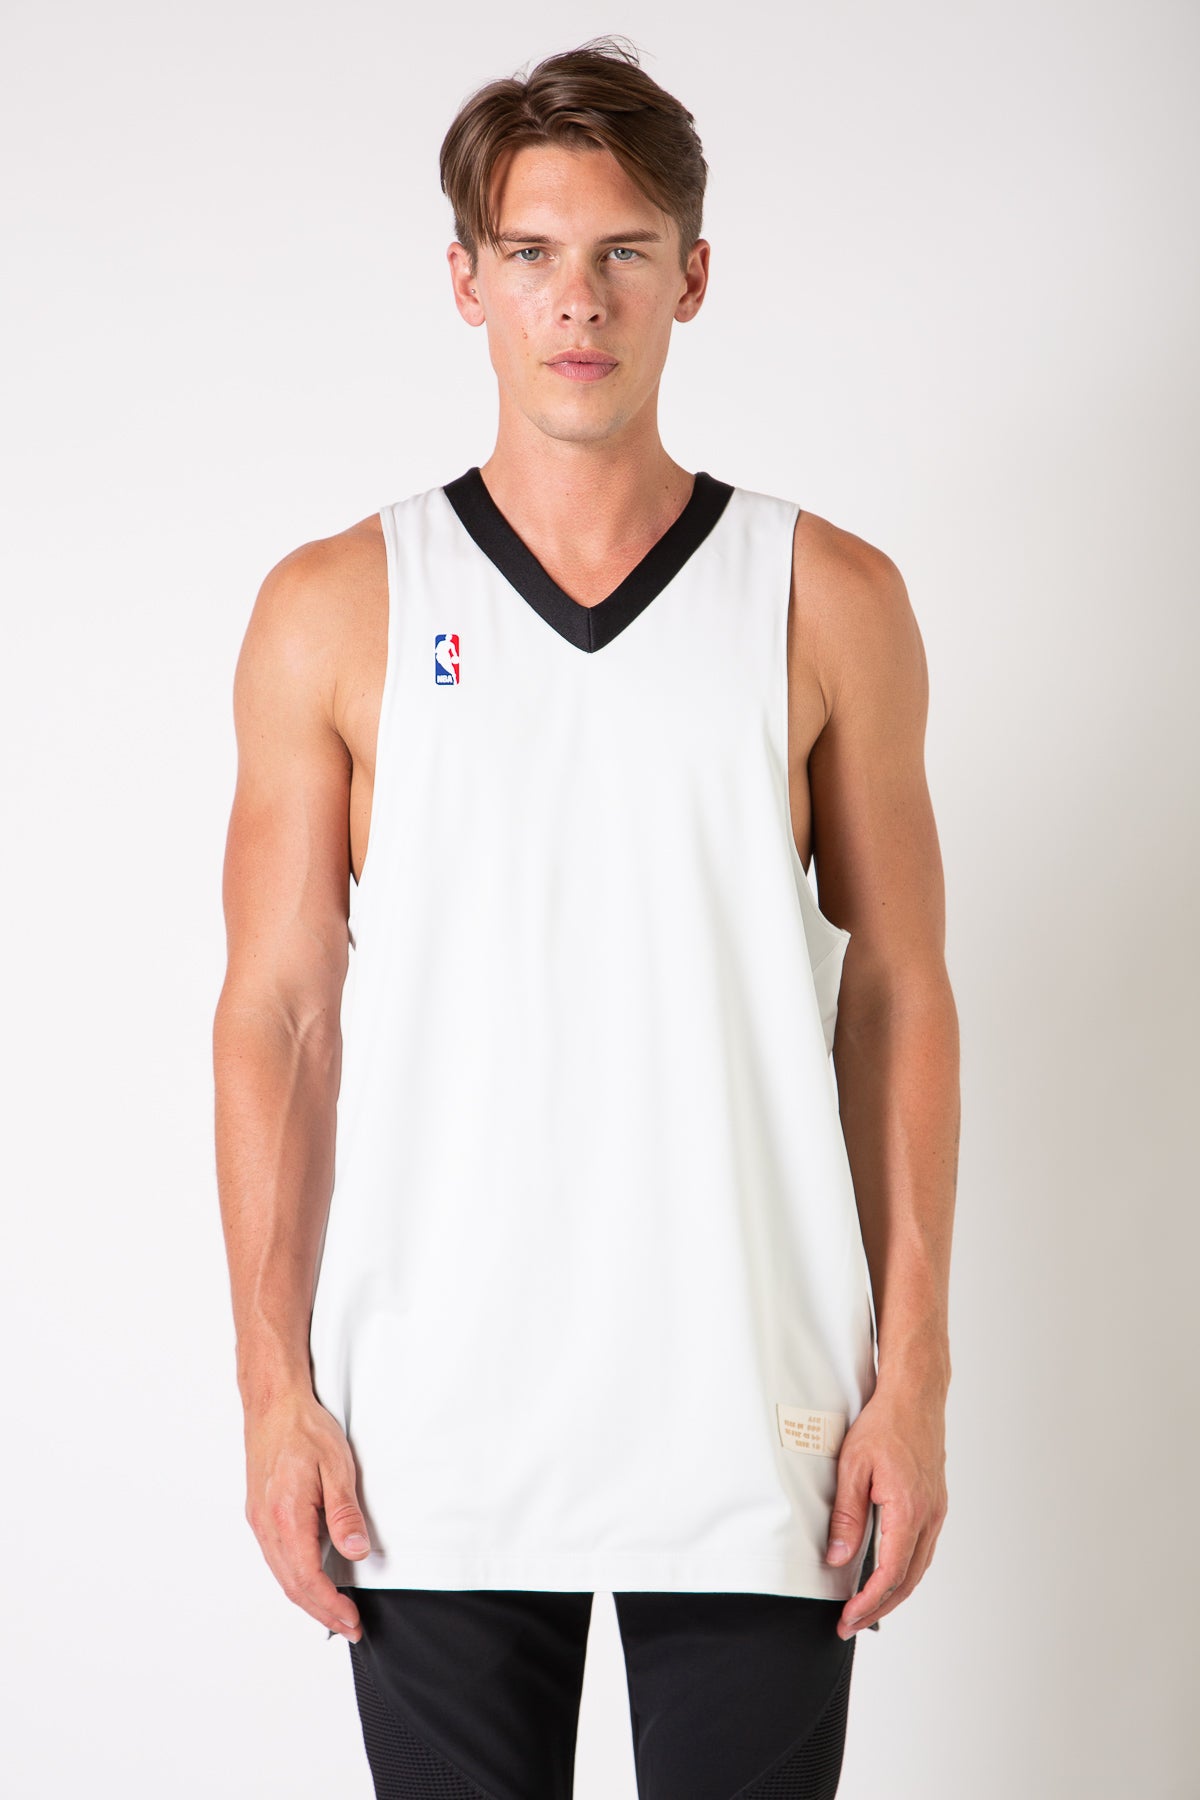 NIKE X FEAR OF GOD | NRG REVERSIBLE JERSEY